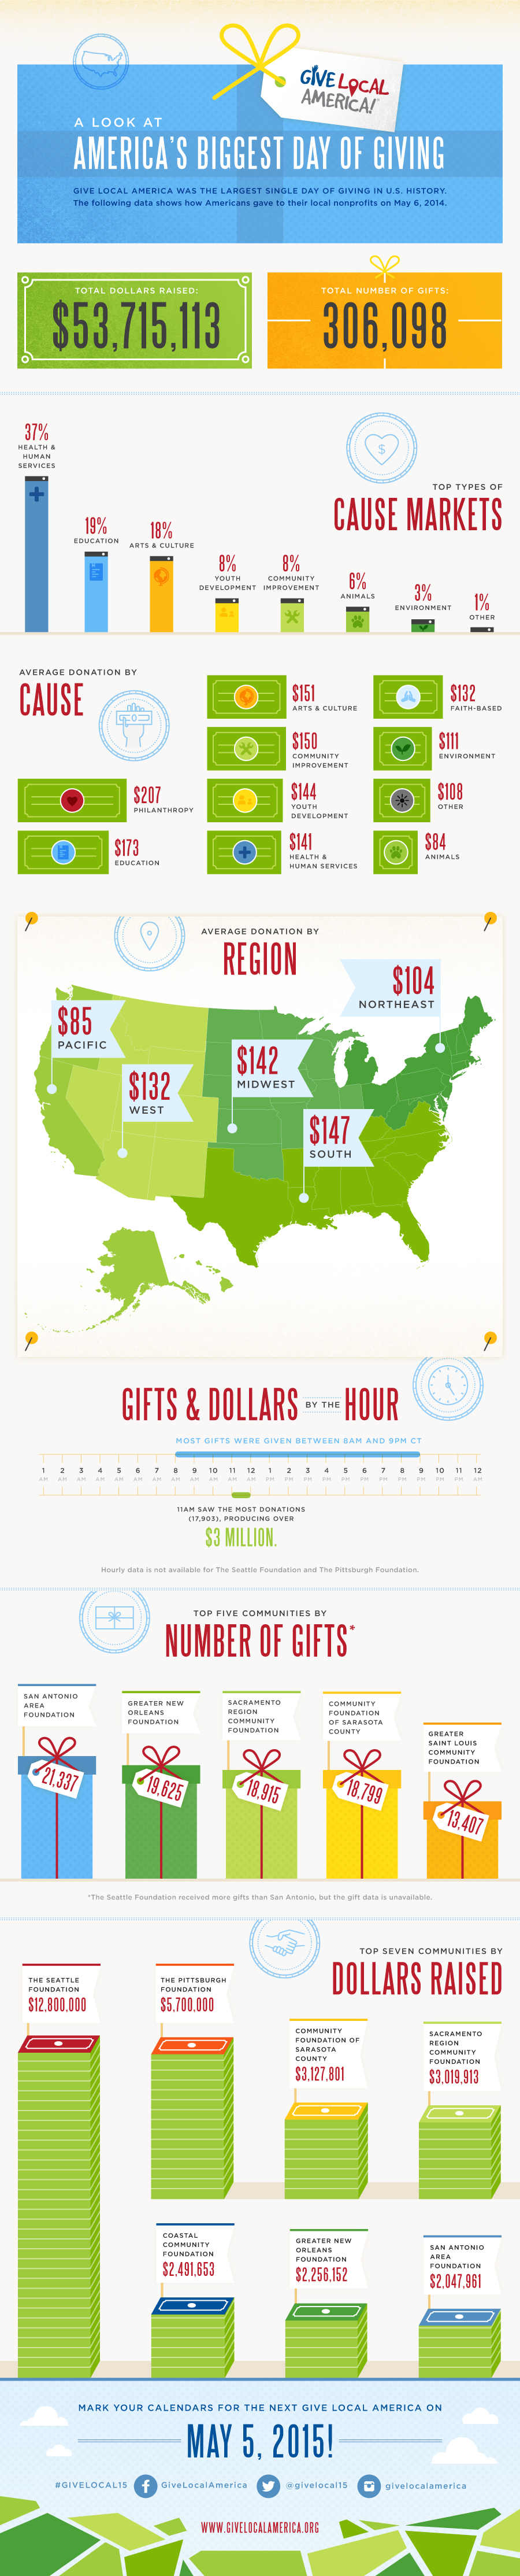 America's Biggest Day of Giving Infographic